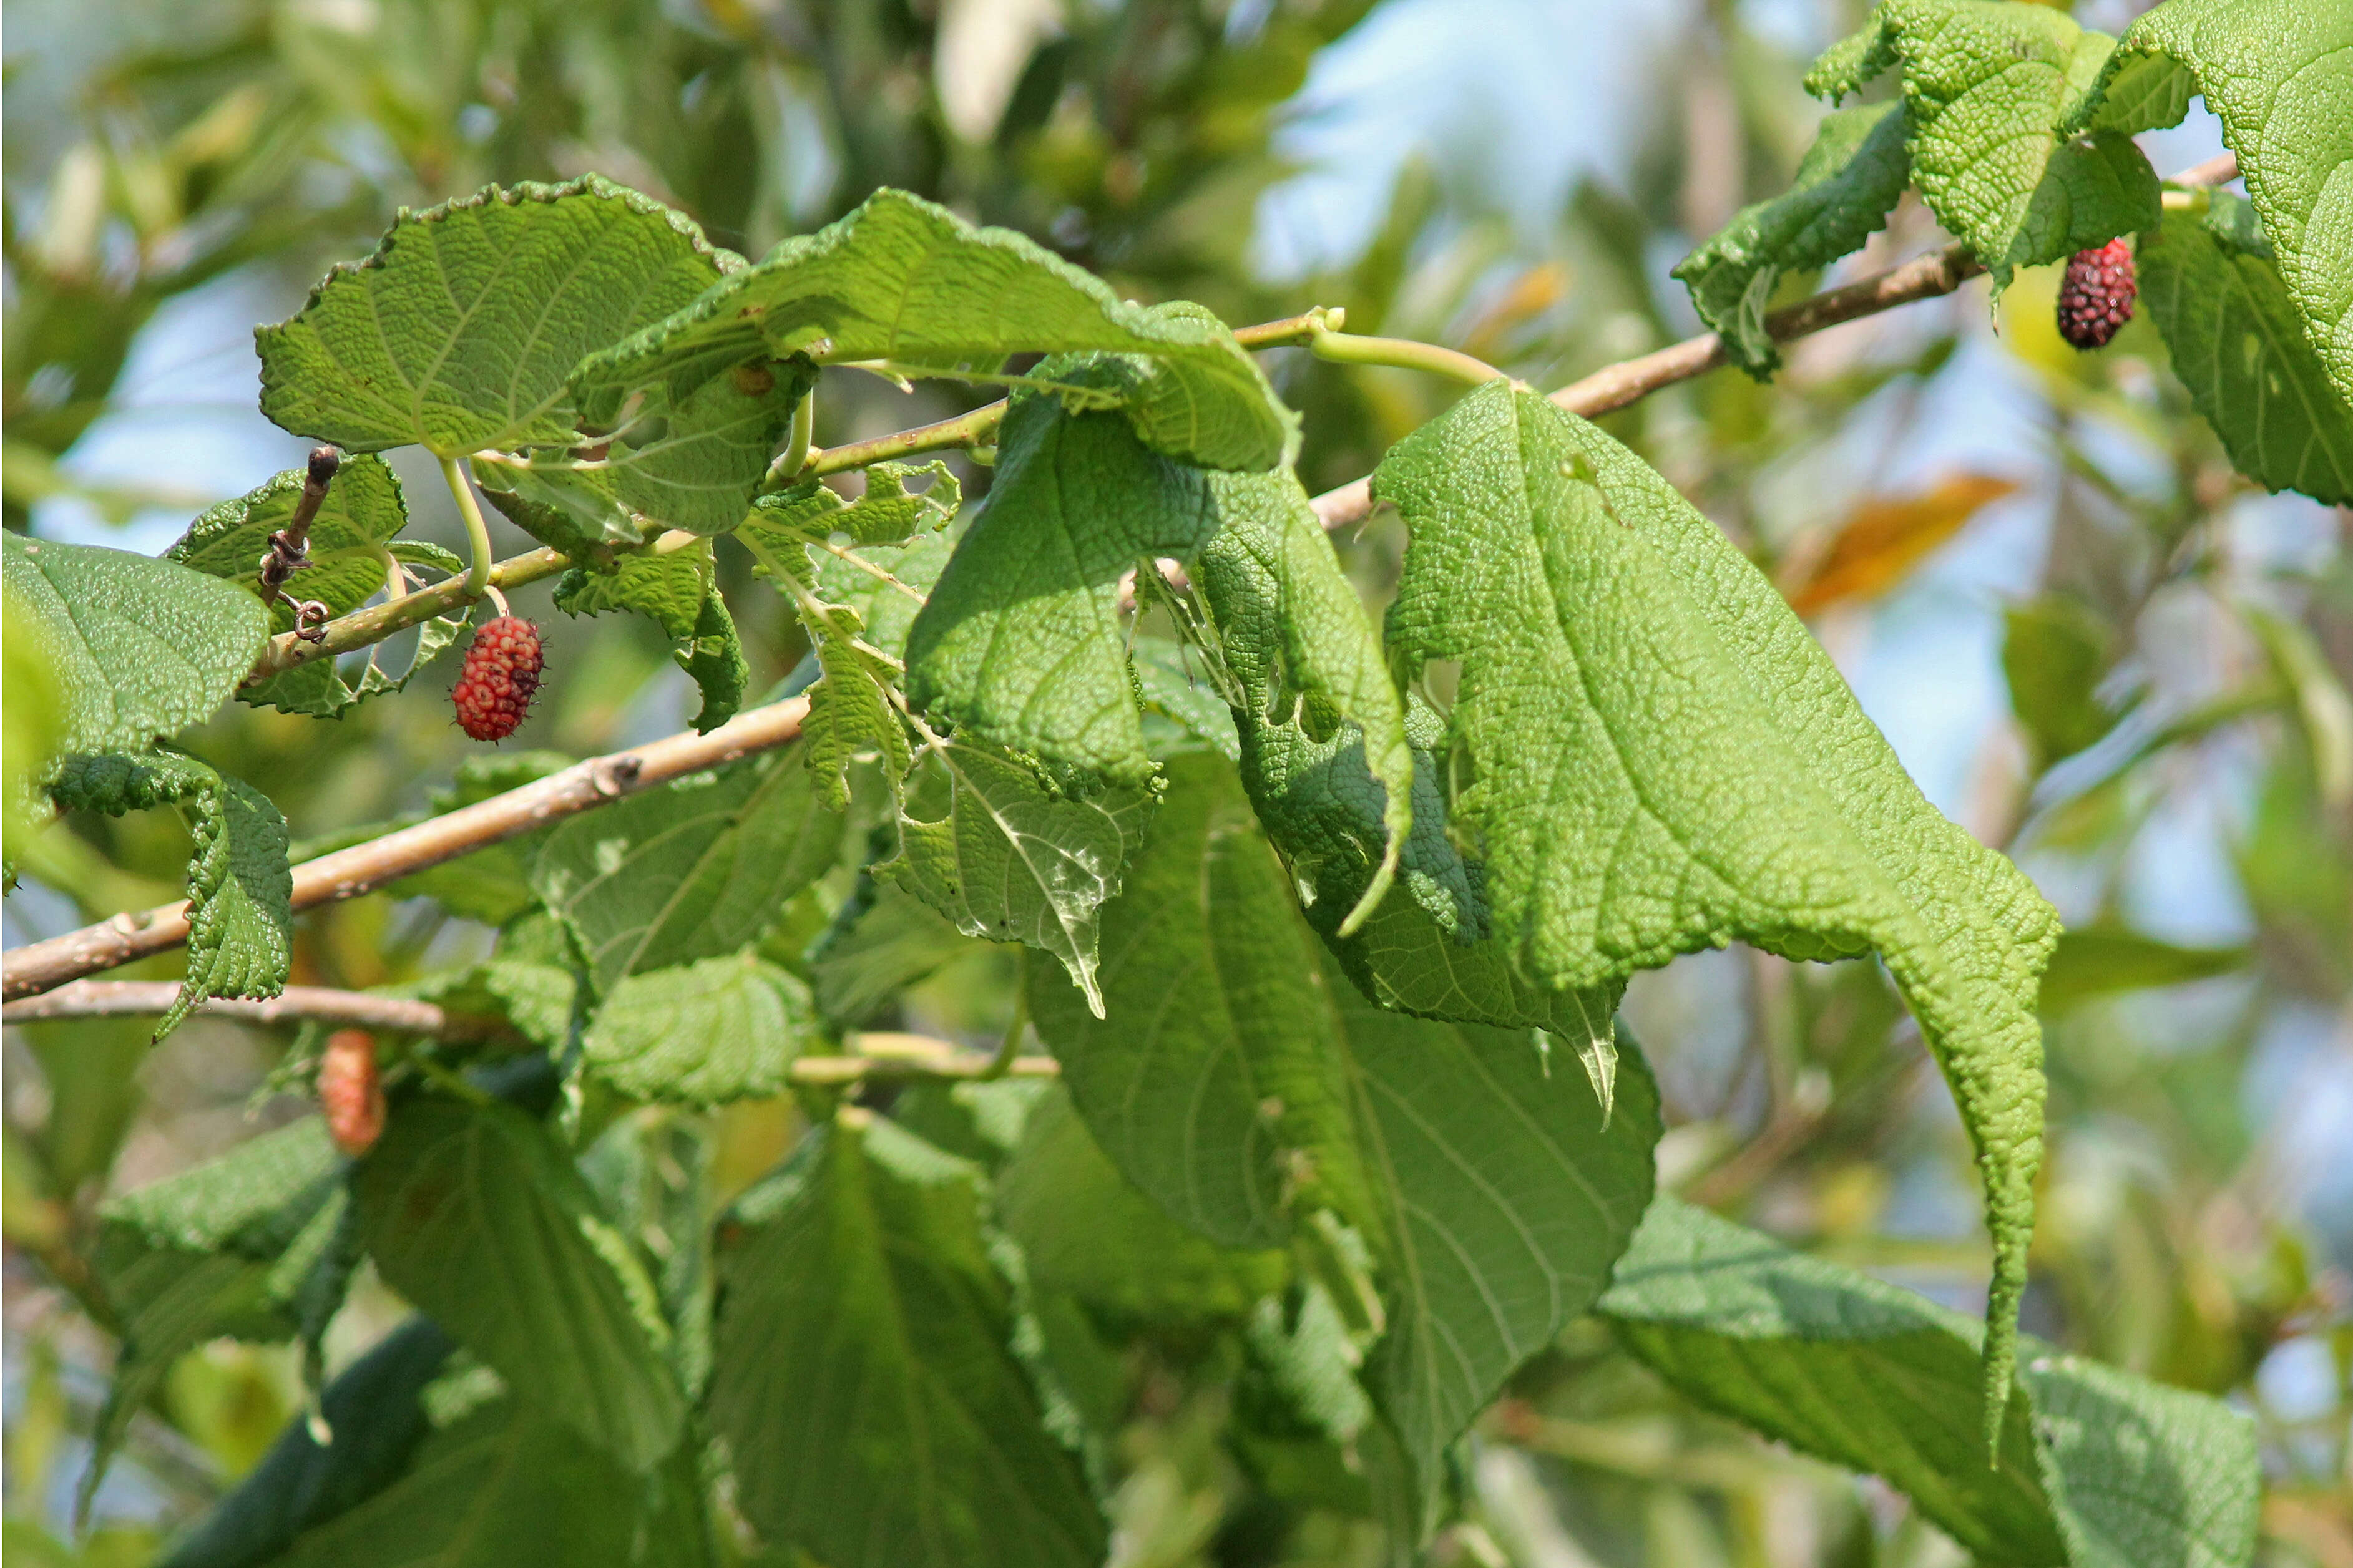 Image of mulberry